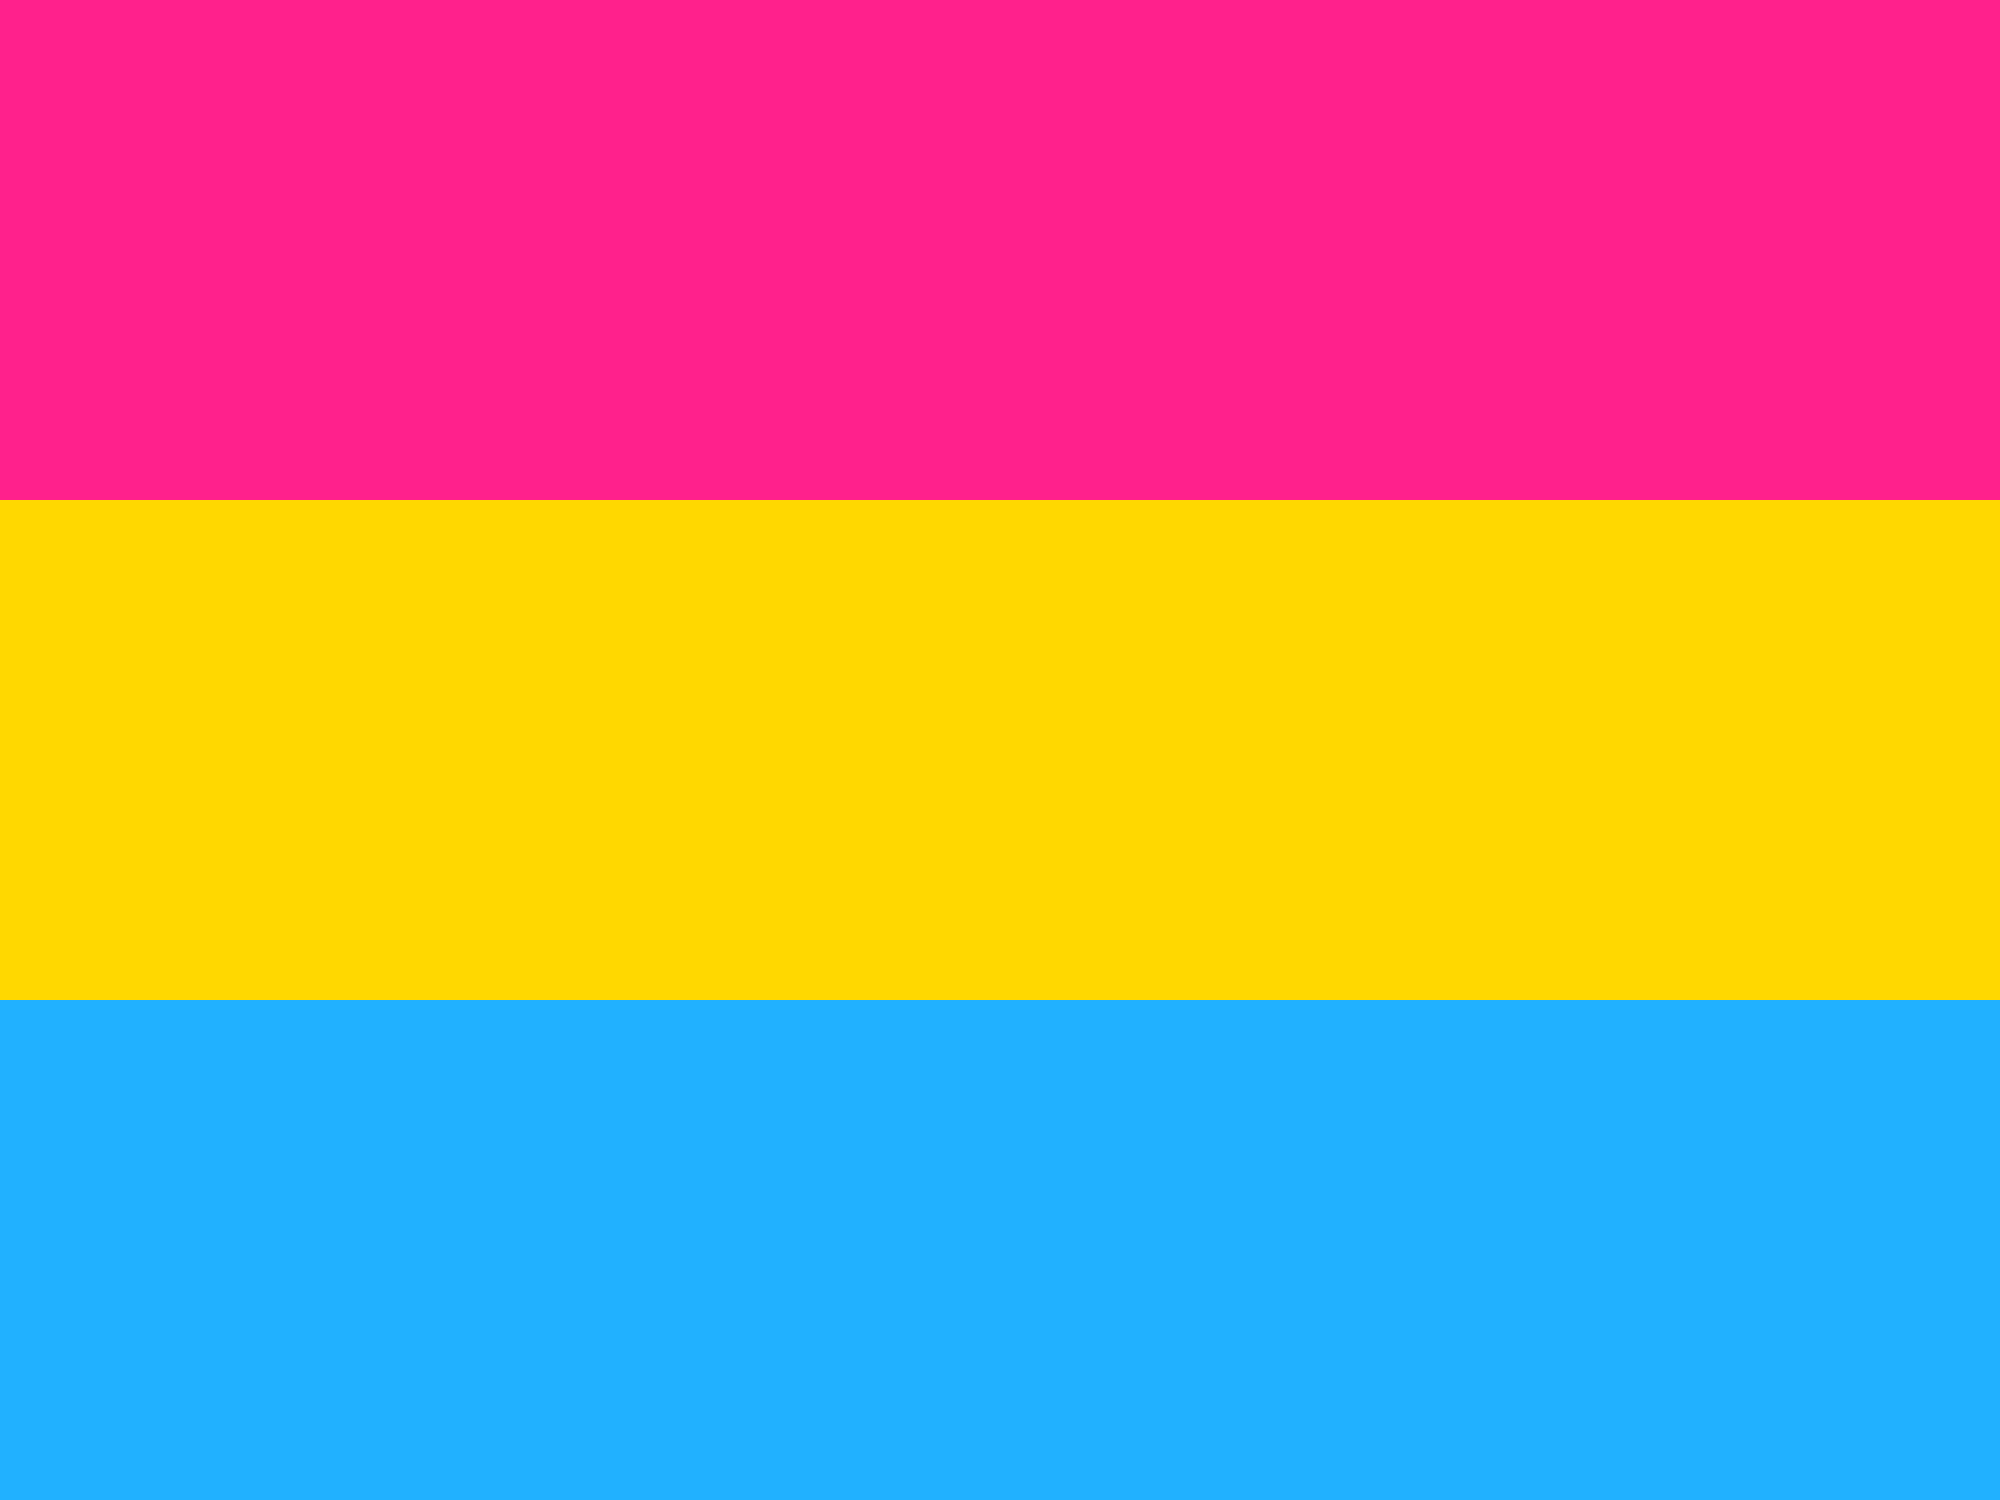 Pansexual pride flag, the free encyclopedia. Project